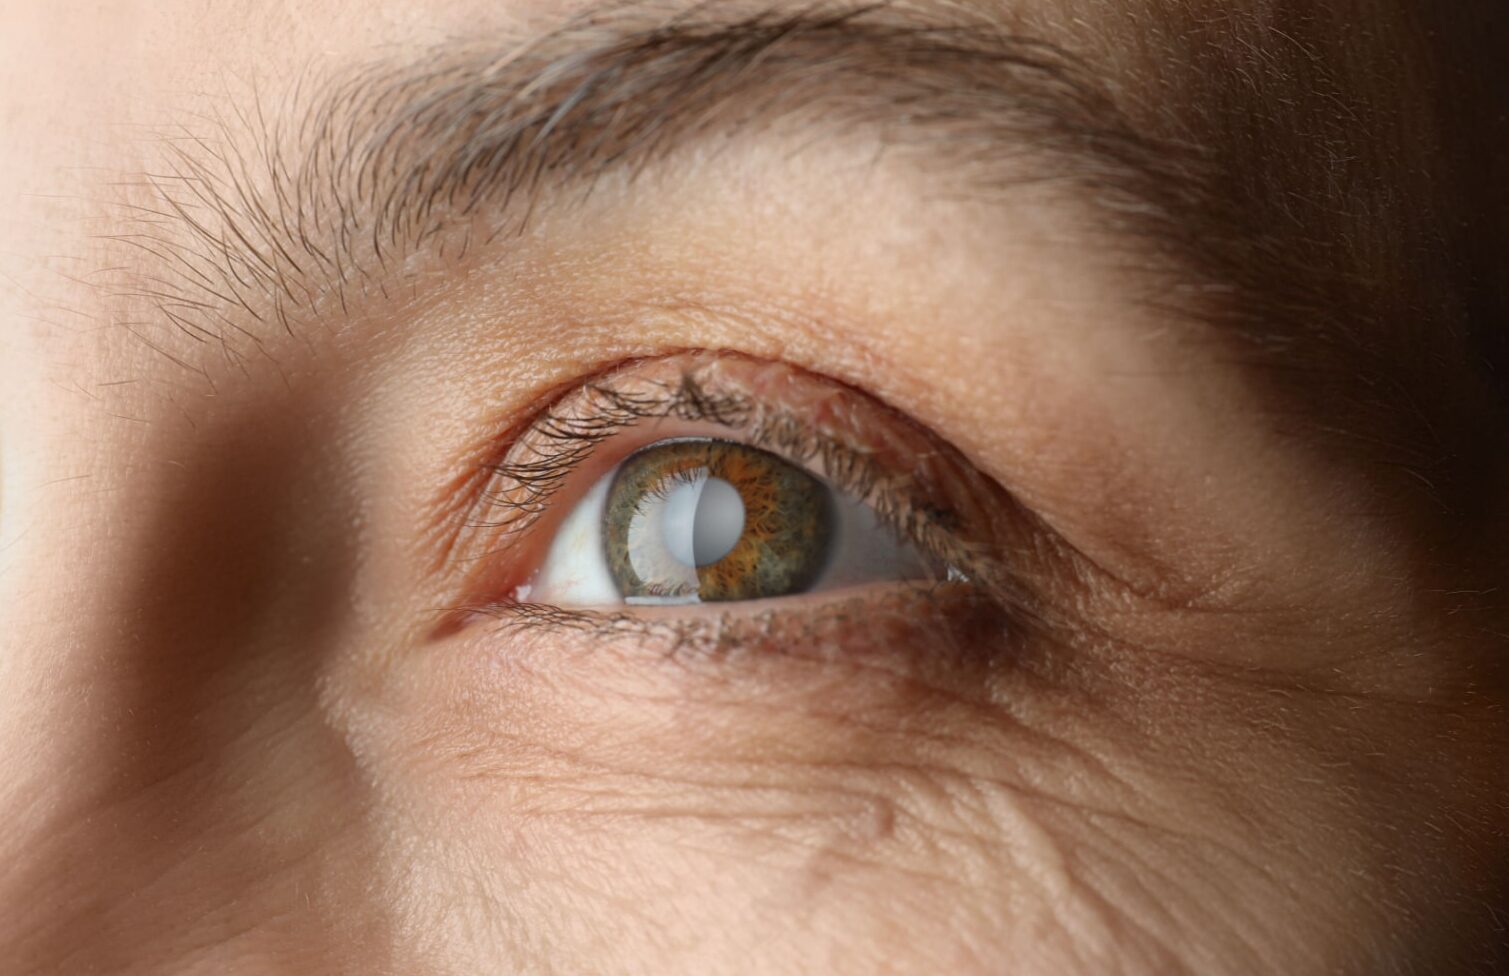 Early Signs of Glaucoma